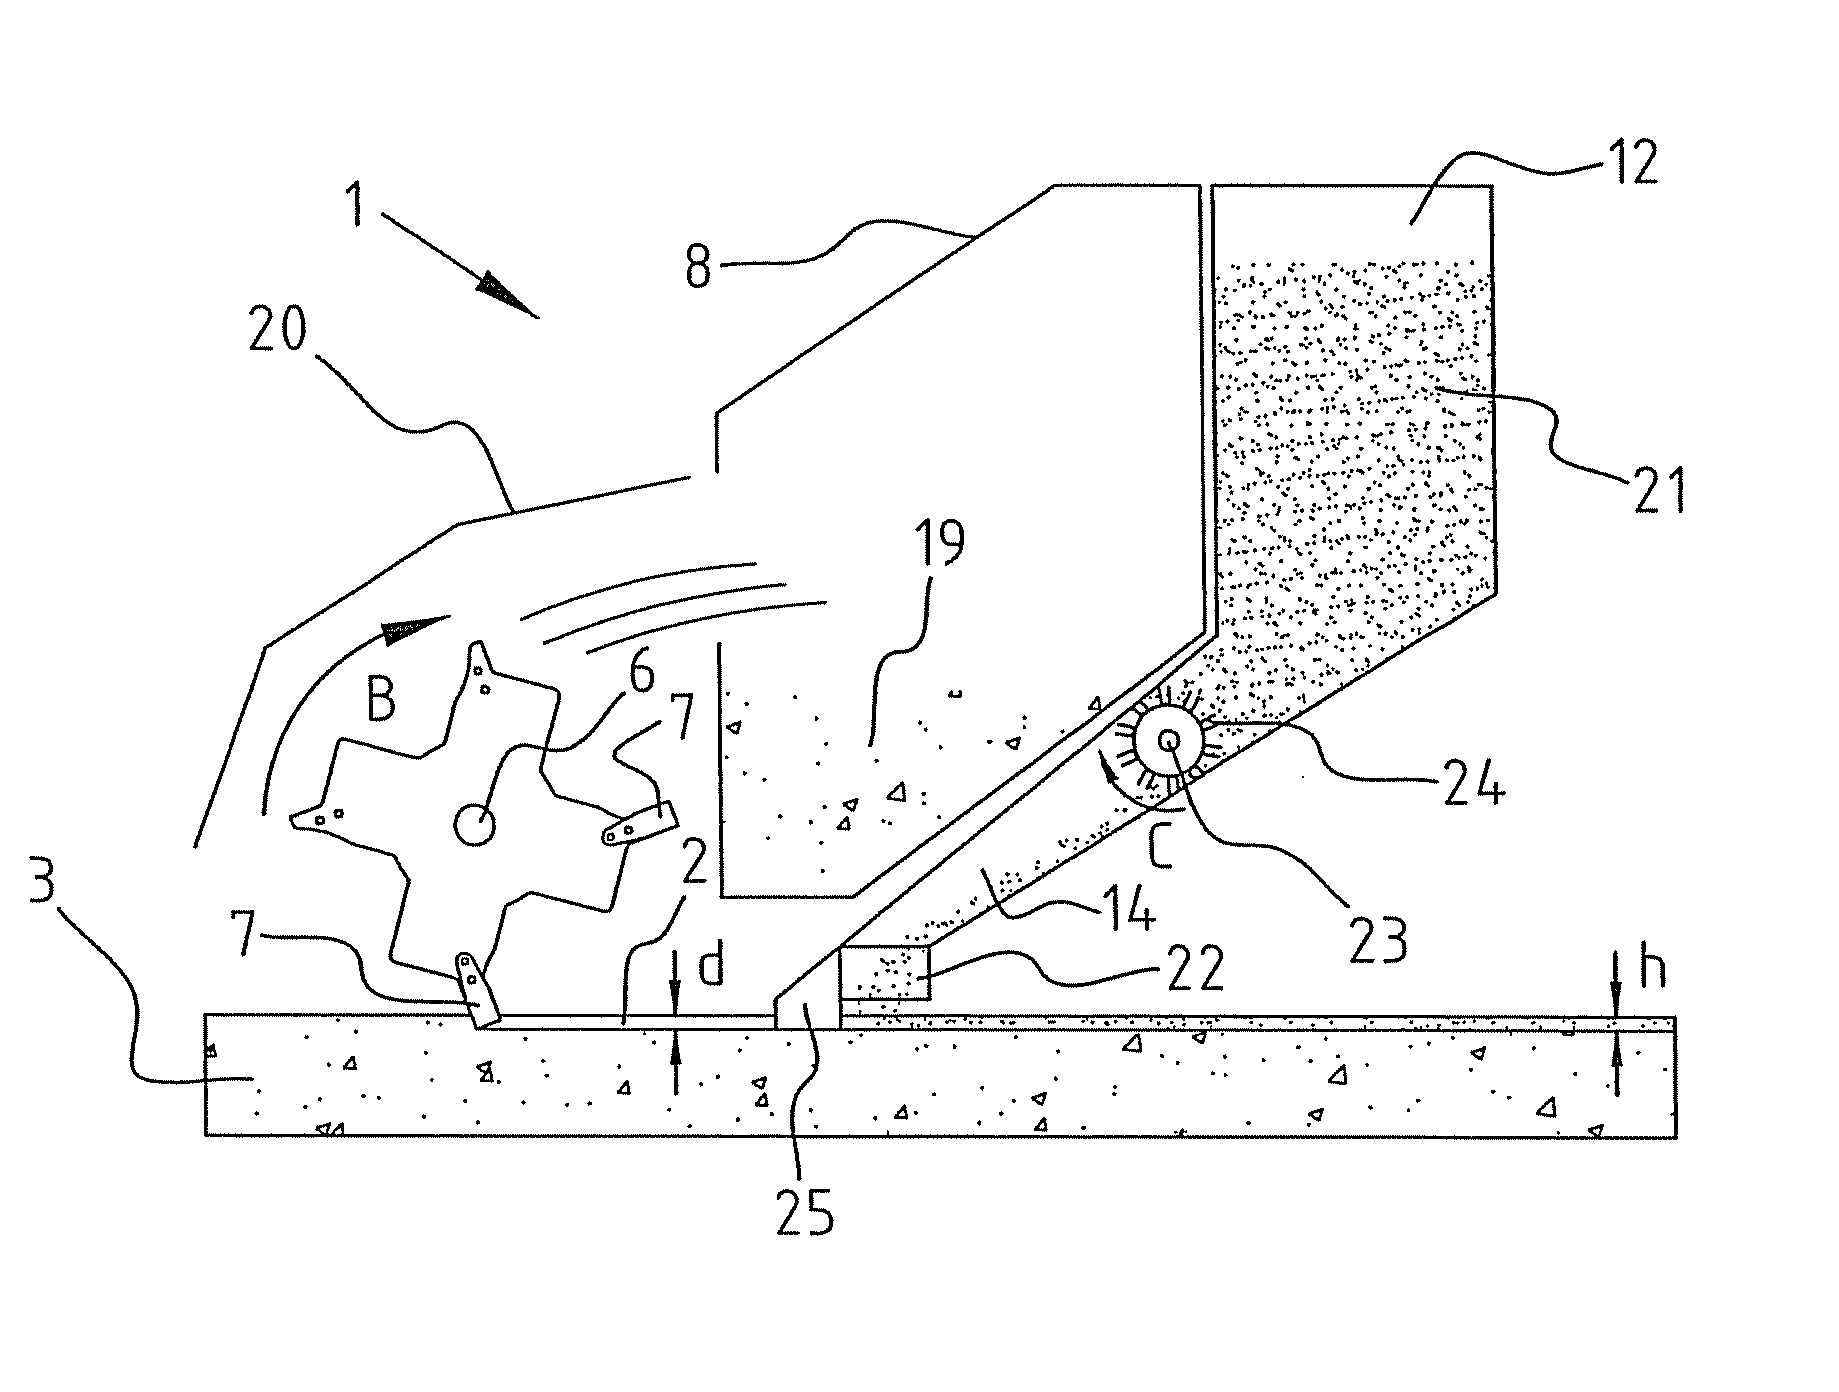 Device for cutting slits in a surface